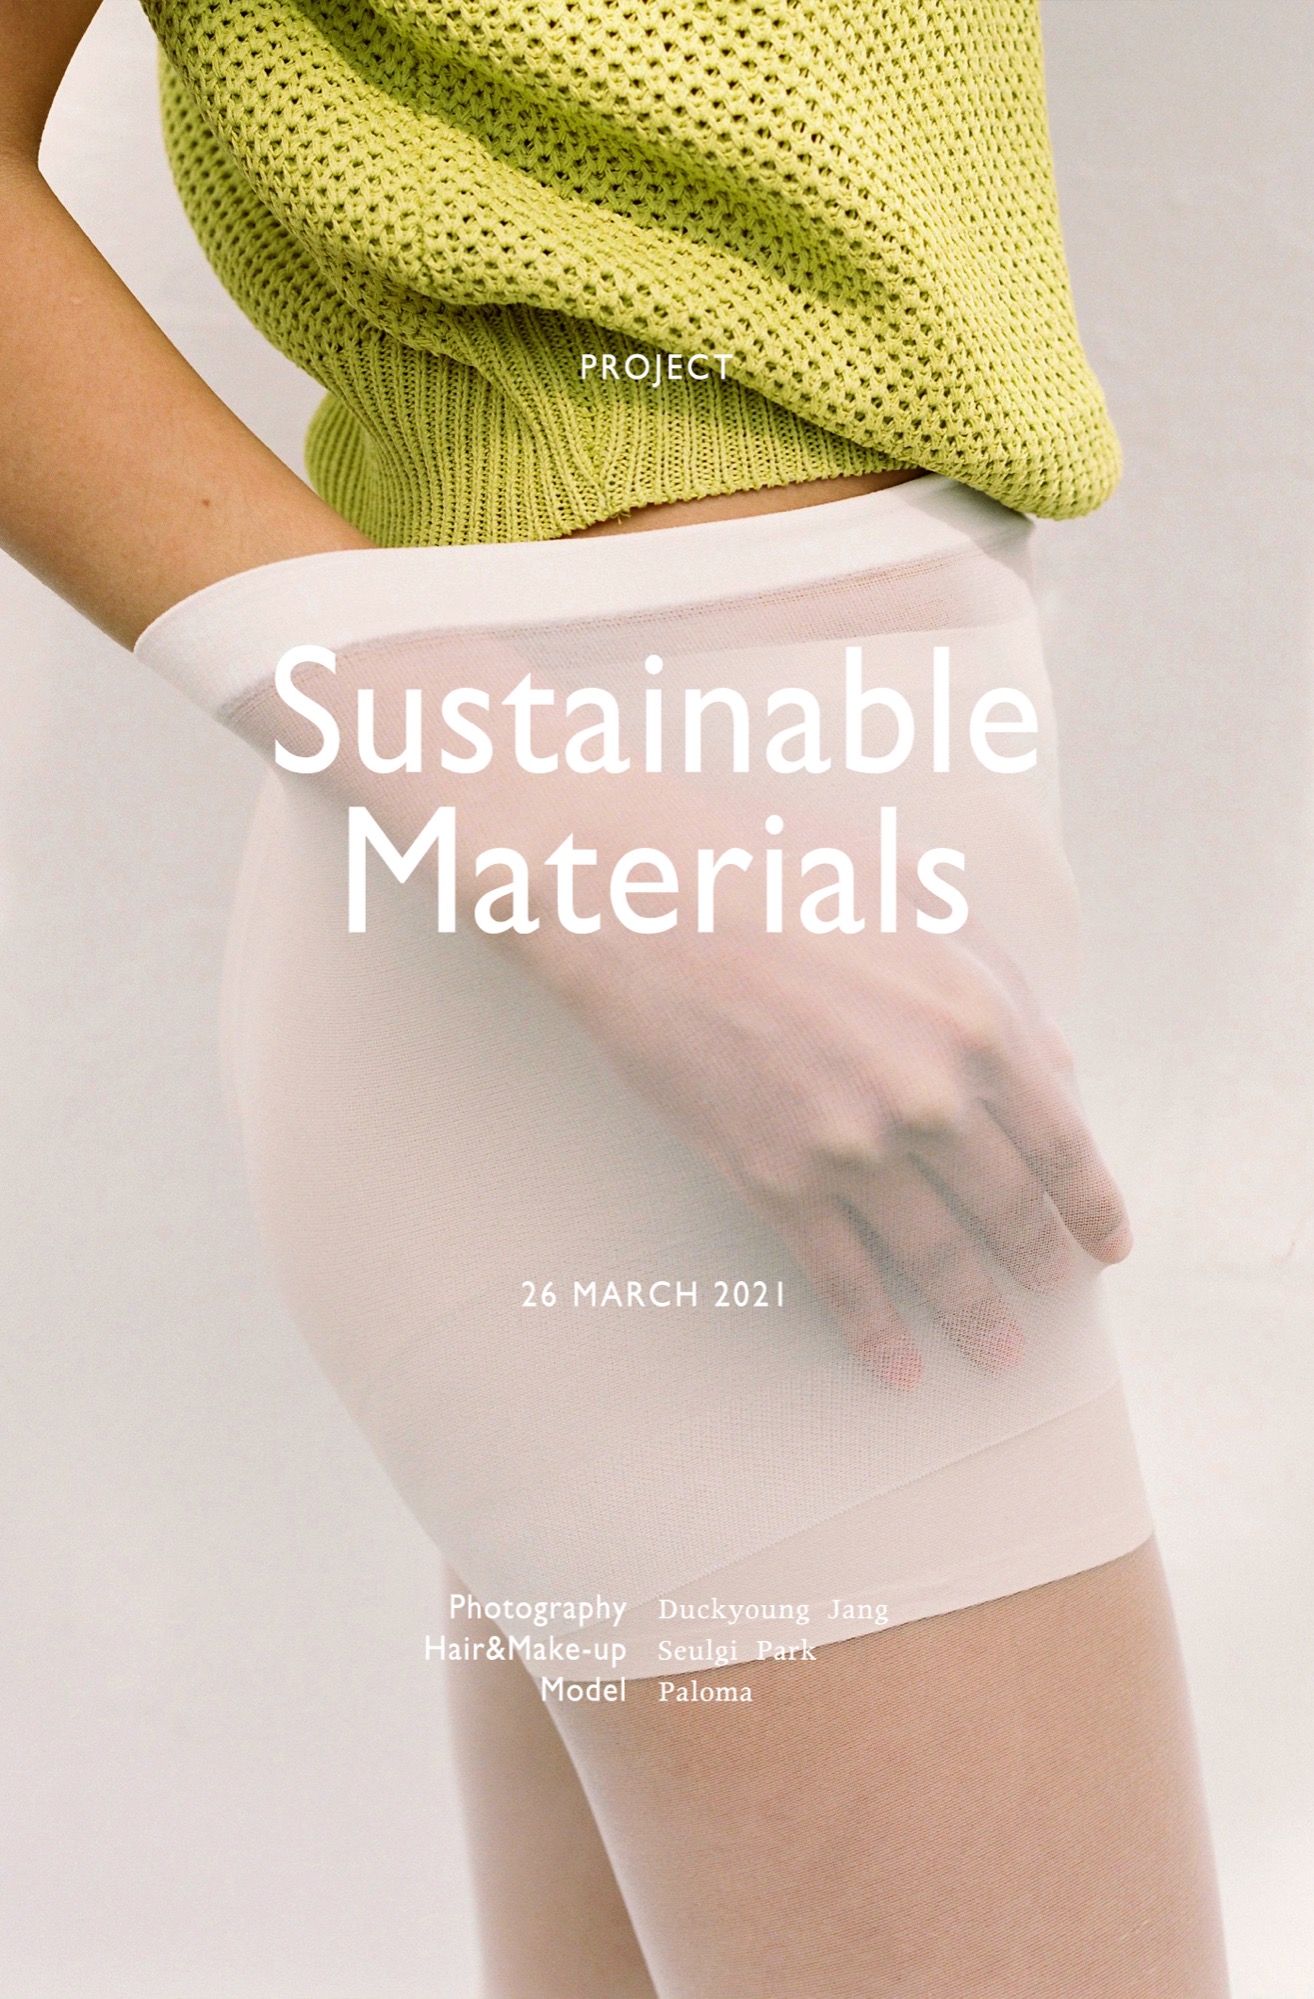 S/S 2021 &#039;Sustainable Materials&#039; with Duckyoung Jang